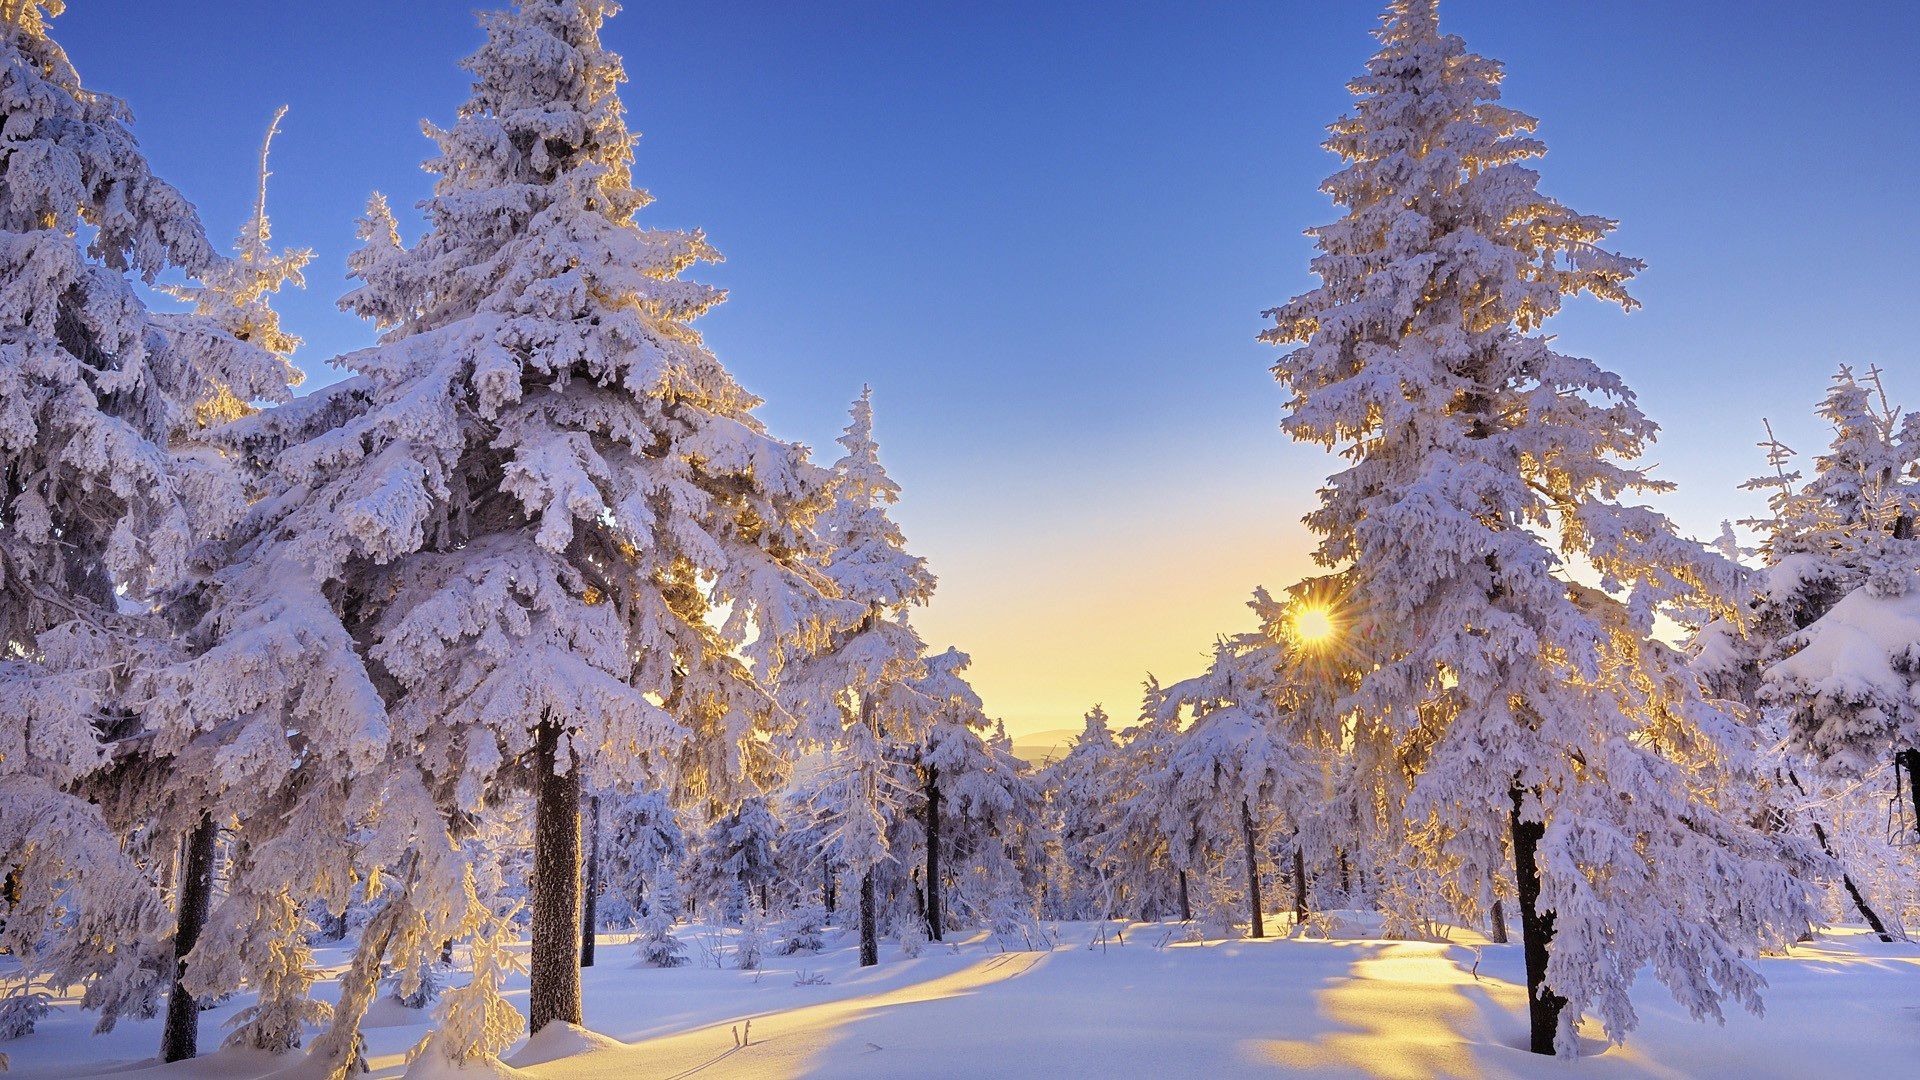 Winter Wallpaper HD 1920x1080 - HD Wallpapers Backgrounds of Your